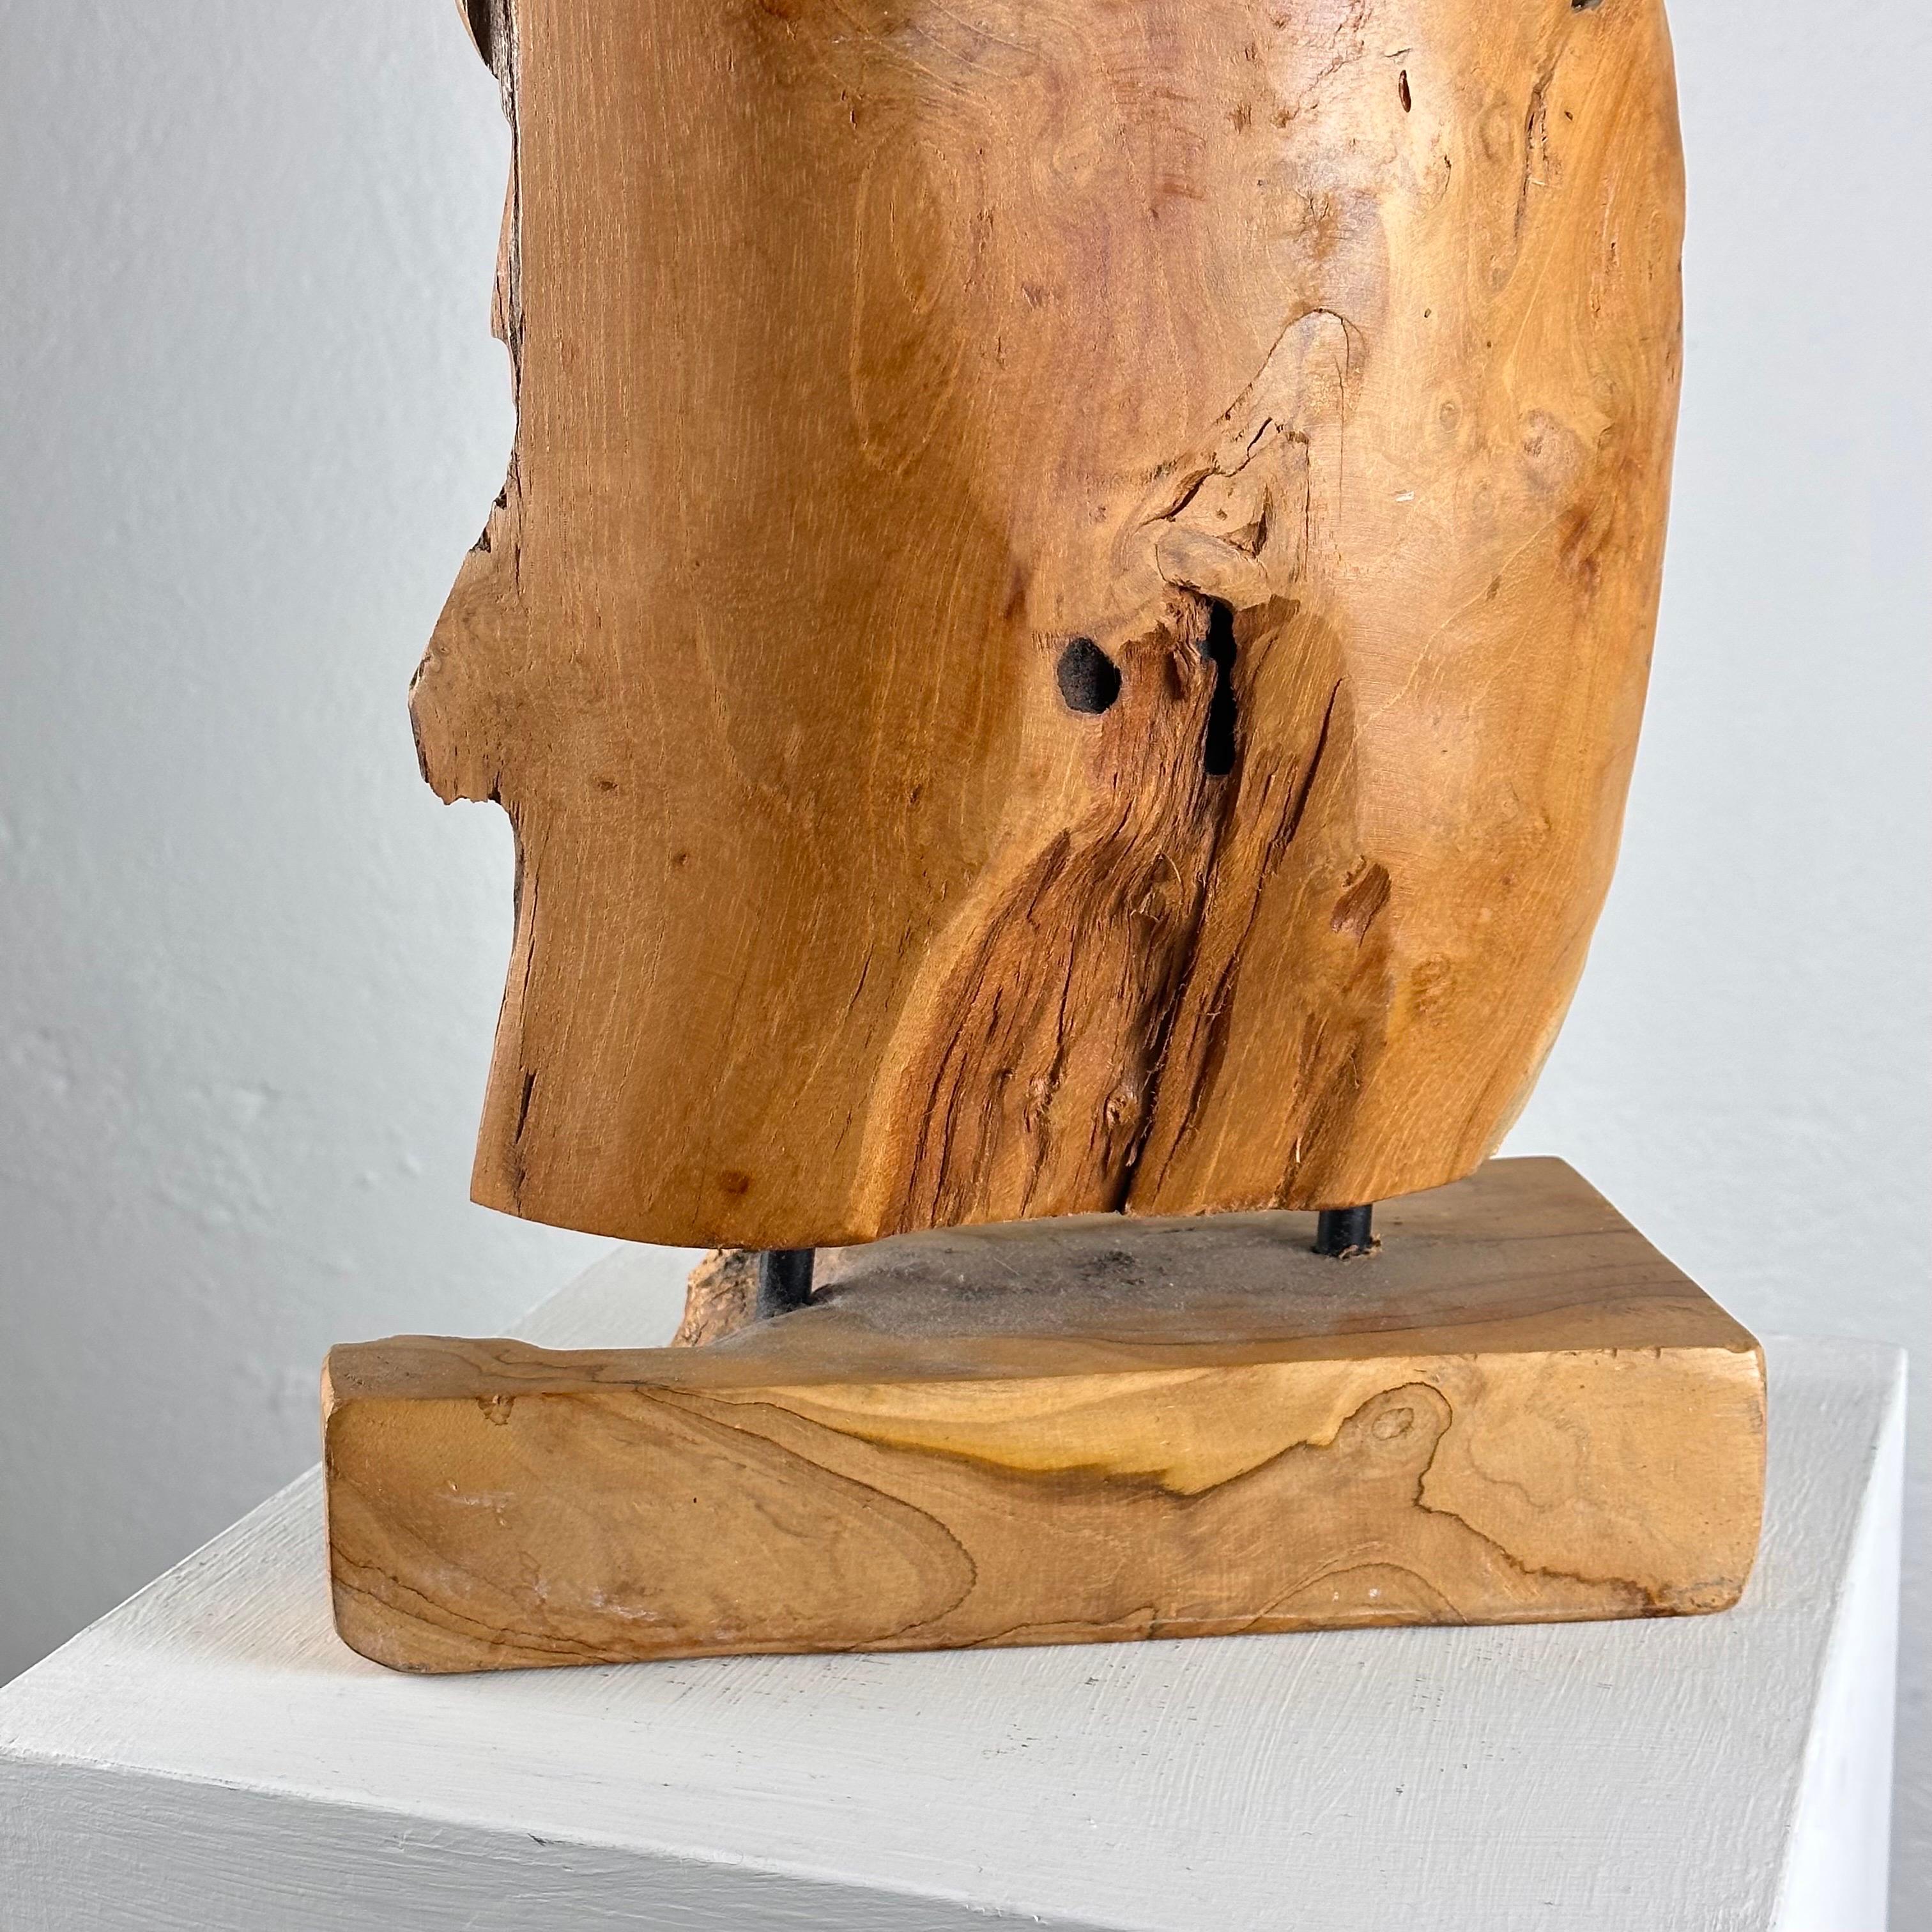 Exquisite Italian Phytomorphic Abstract Sculpture in Natural Ash, 1960s For Sale 12